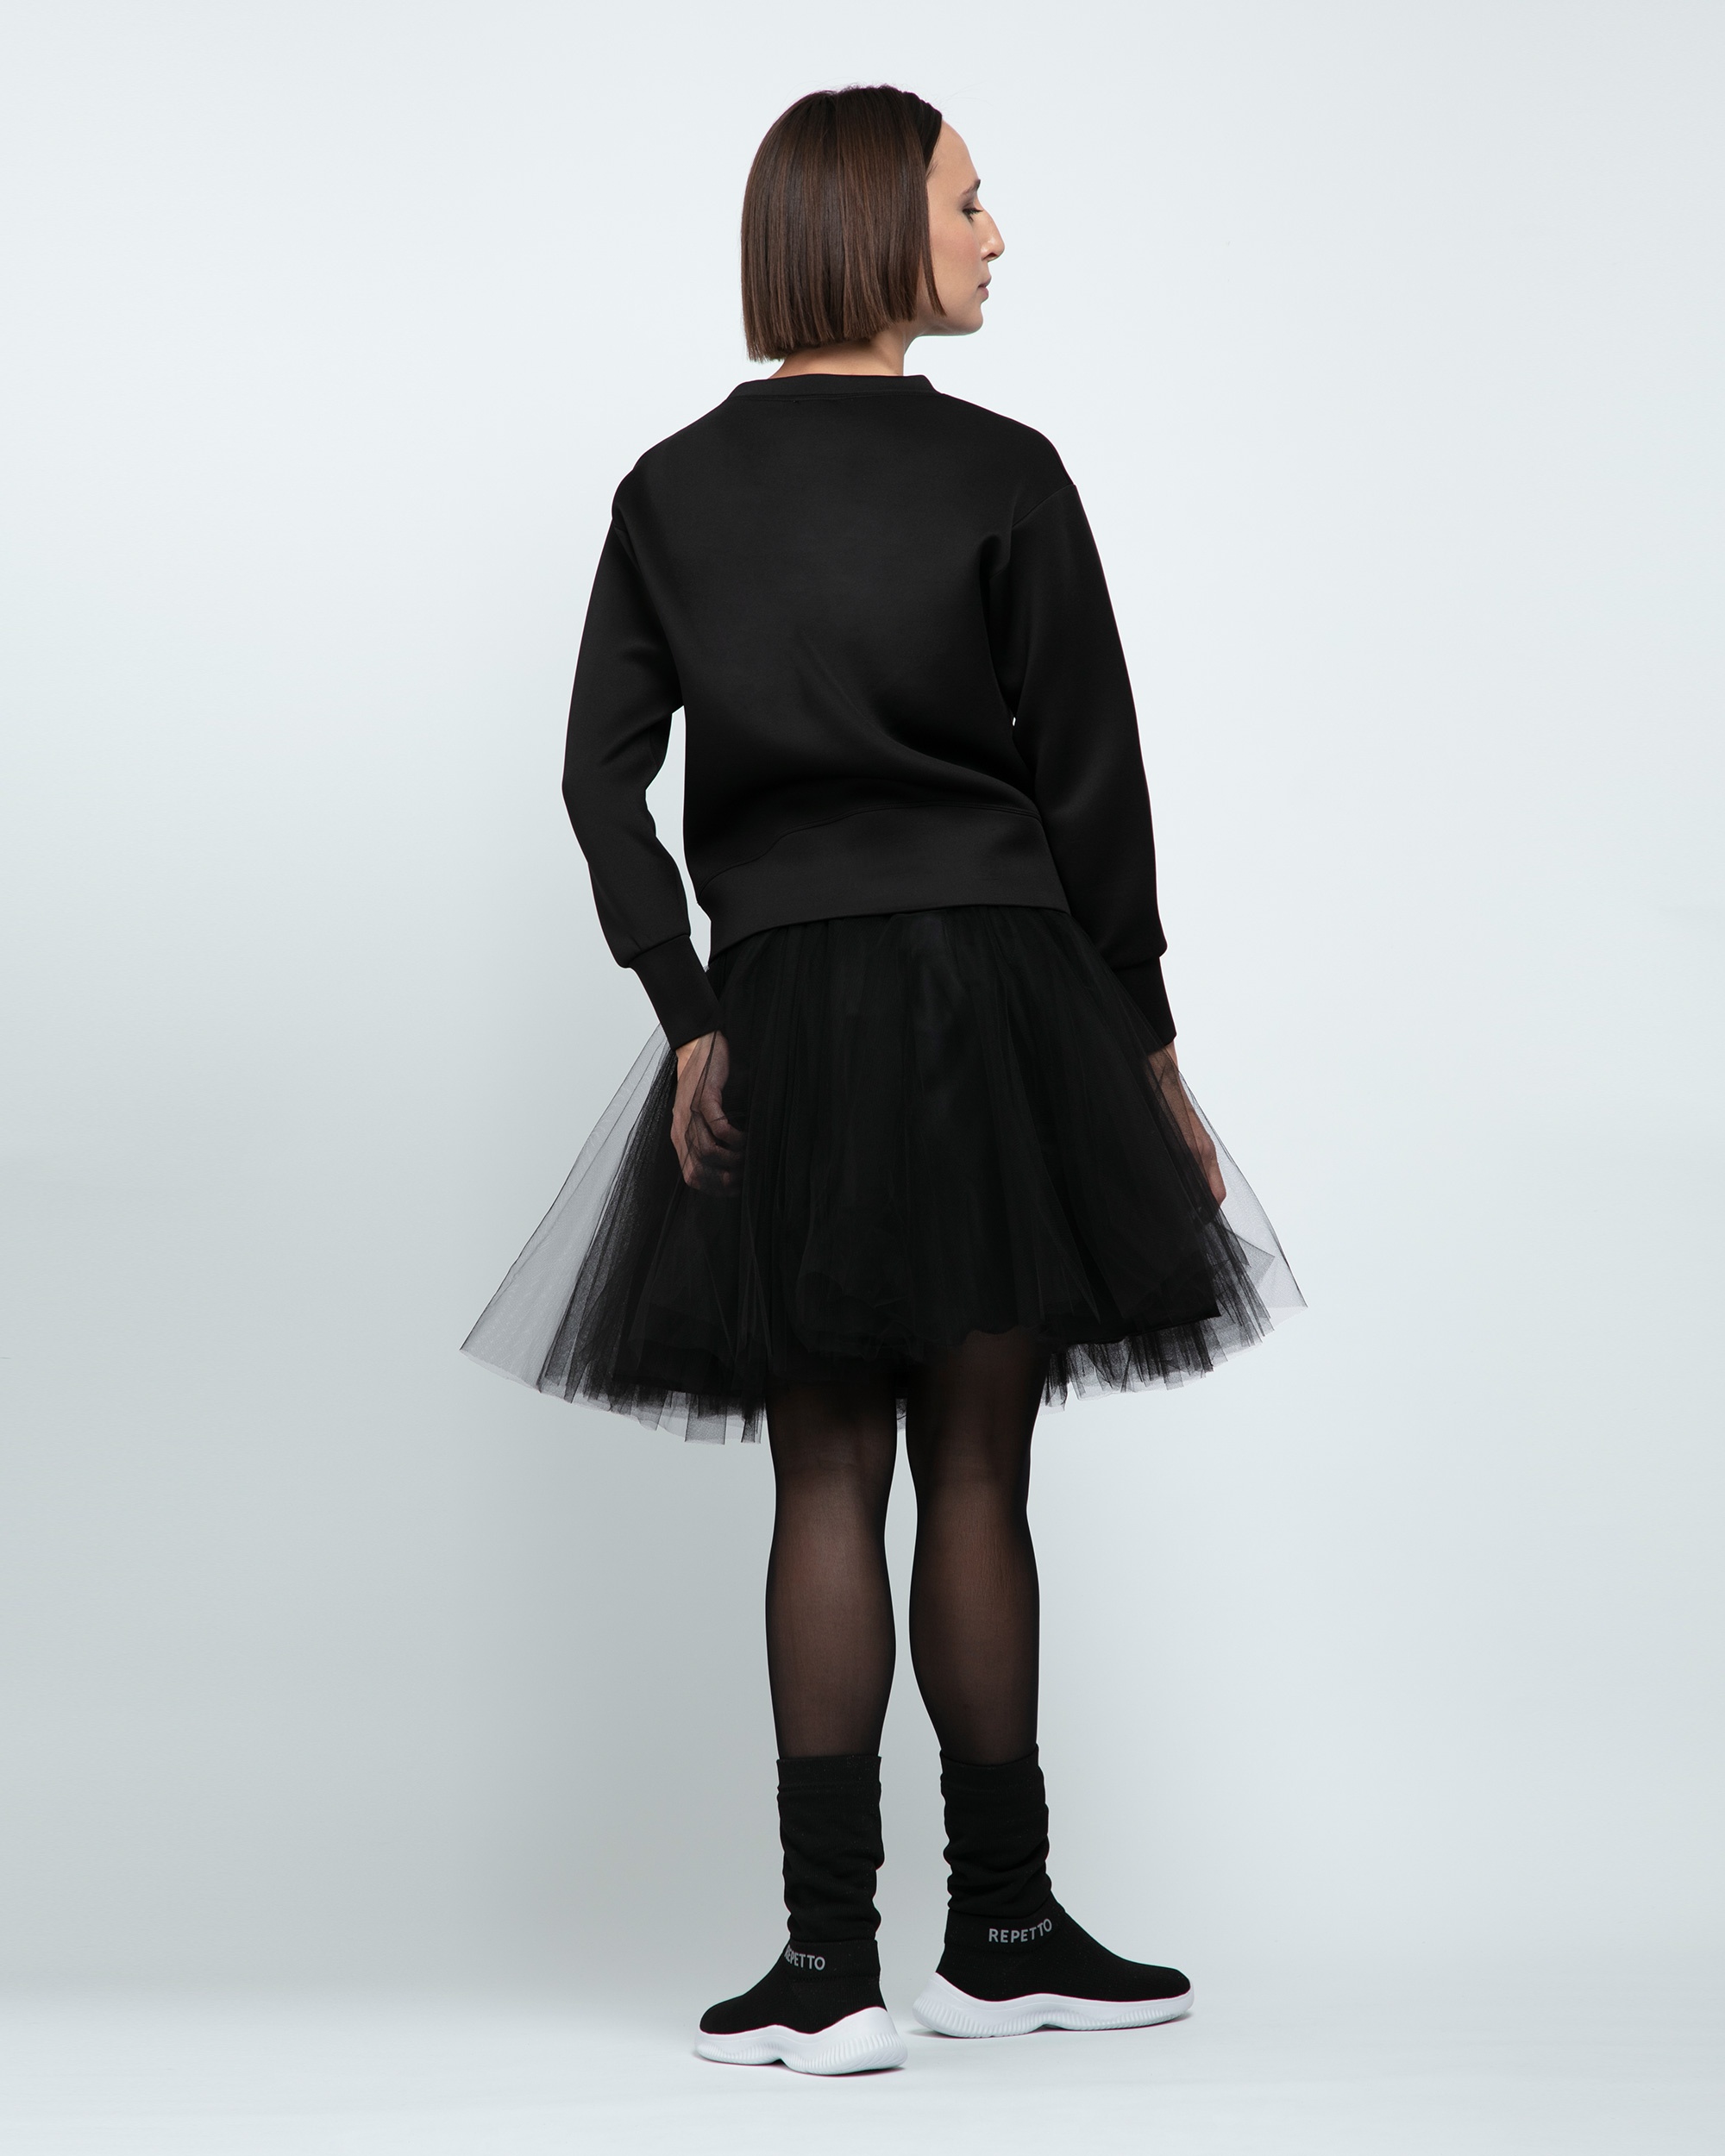 "Dance with Repetto" sweater - 3